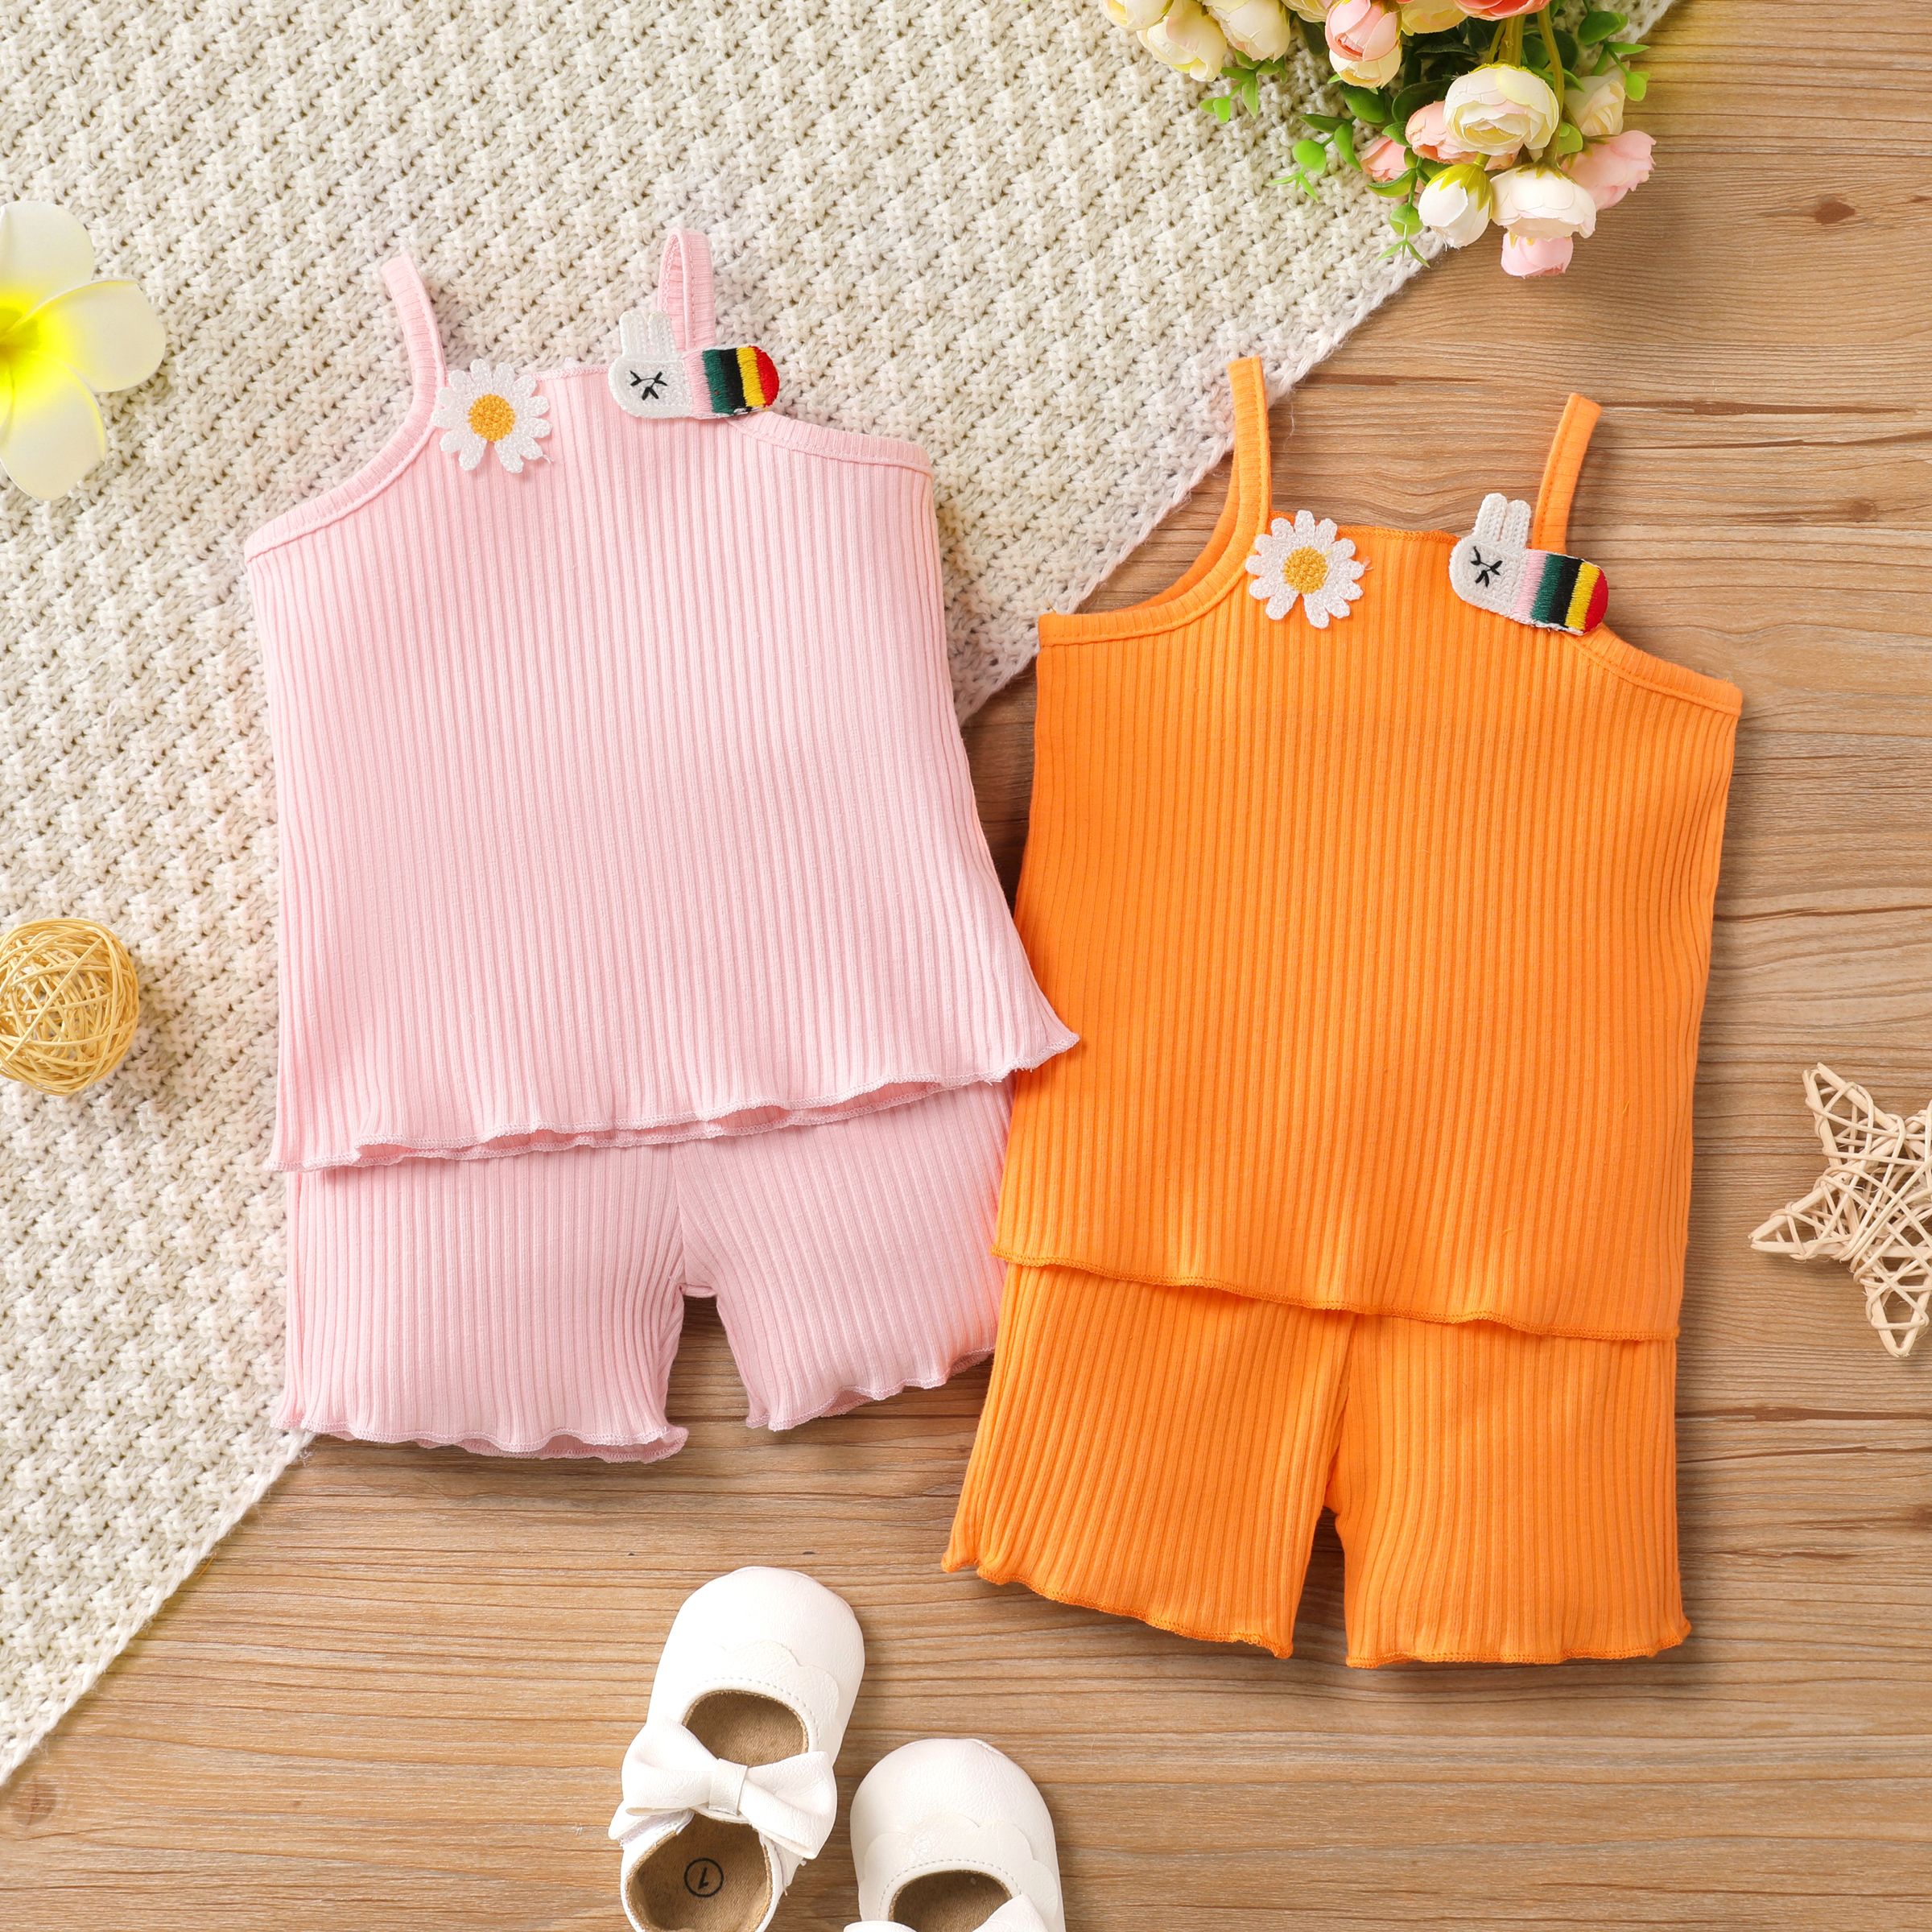 2pcs Baby Girl's Solid Color Casual Cotton Top And Shorts Set With Hanging Strap